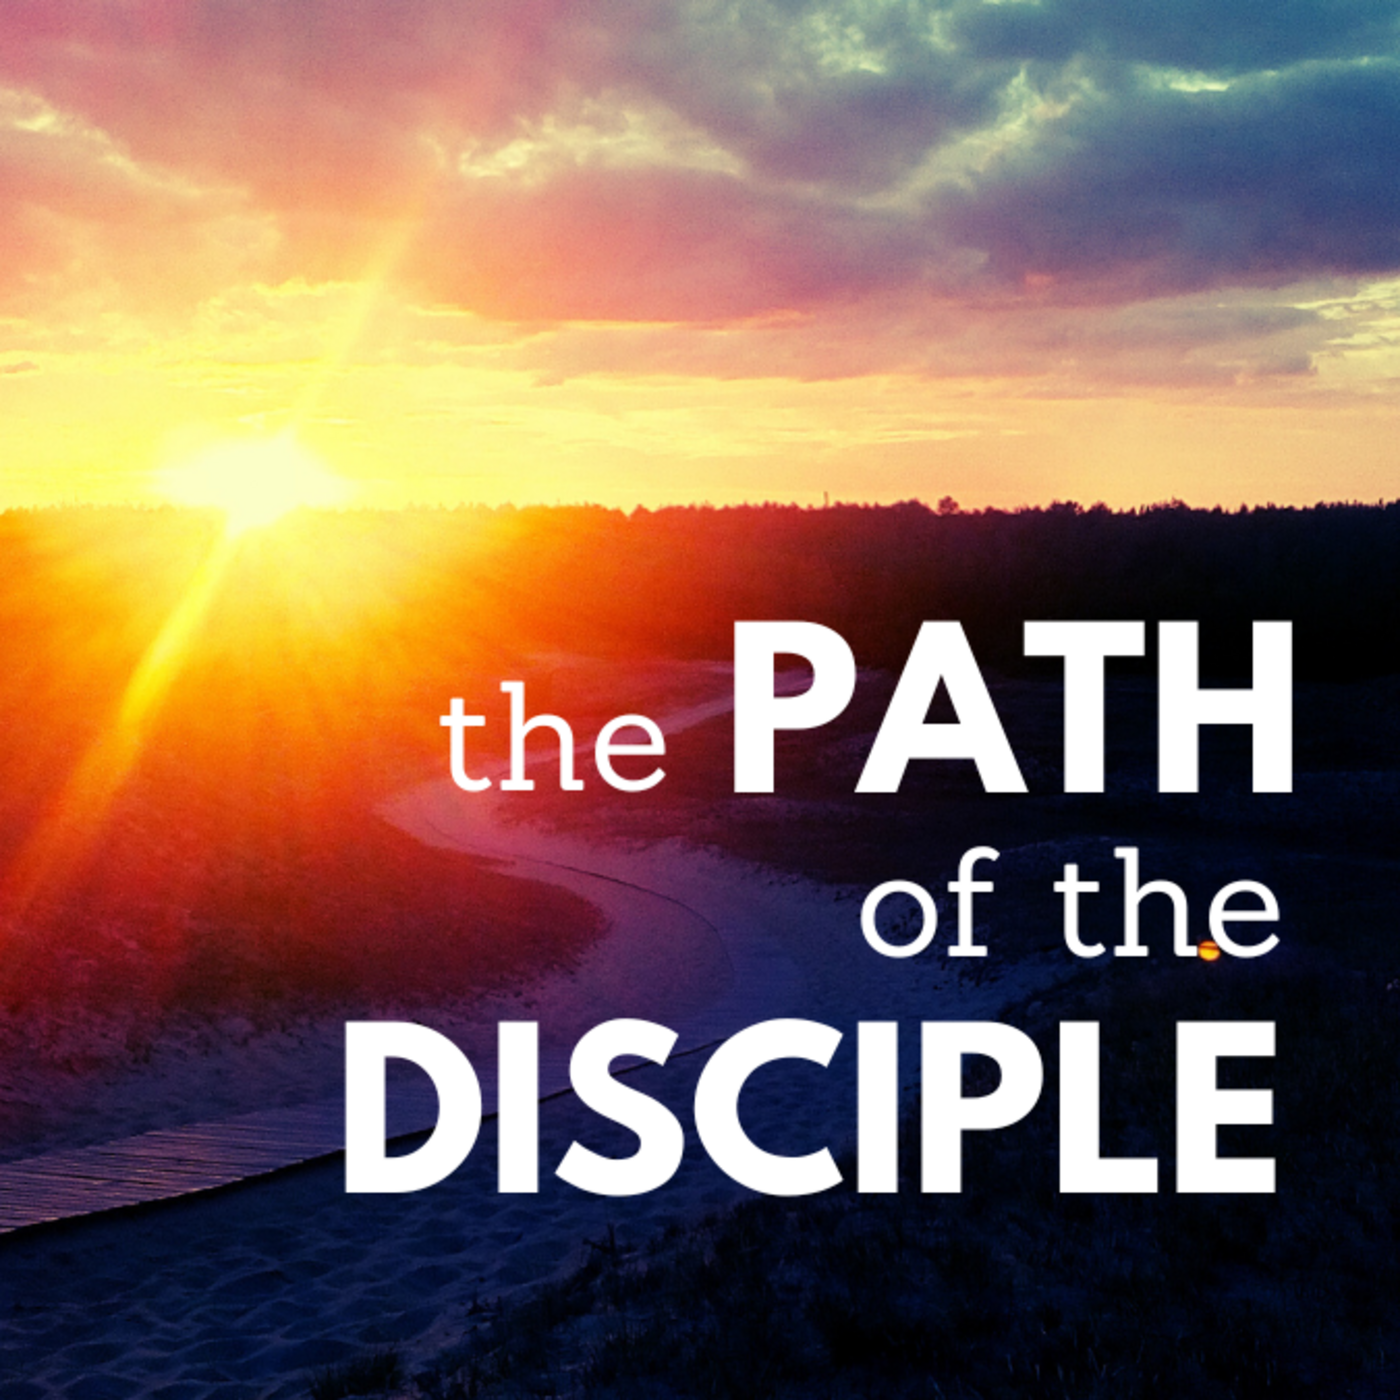 Episode 193: The Path of the Disciple - Wheat and Weeds